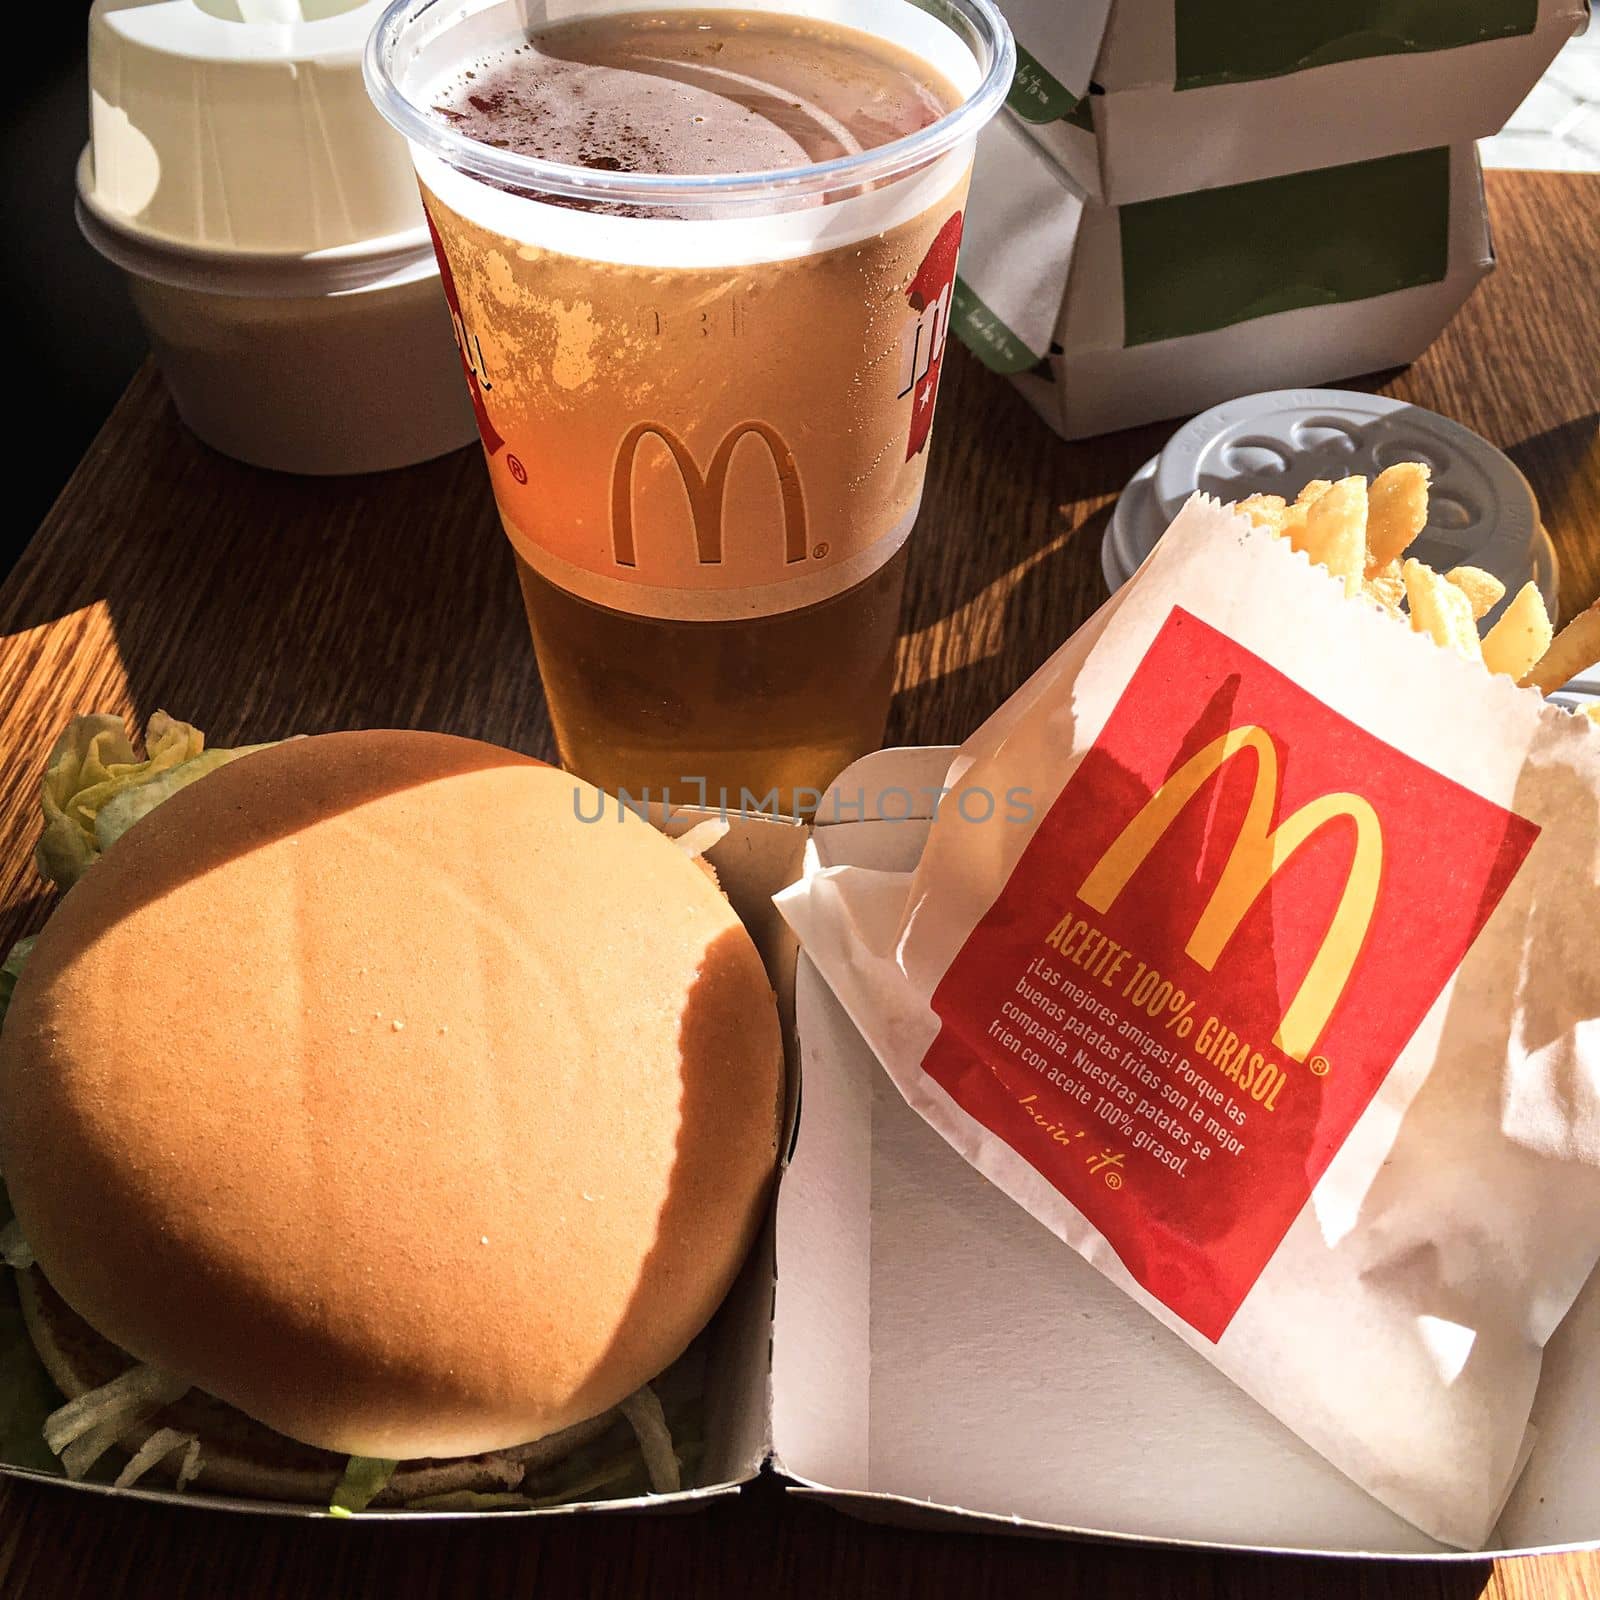 Mcdonalds burger with fries and a beer. Barcelona spain style mcdonalds. High quality photo